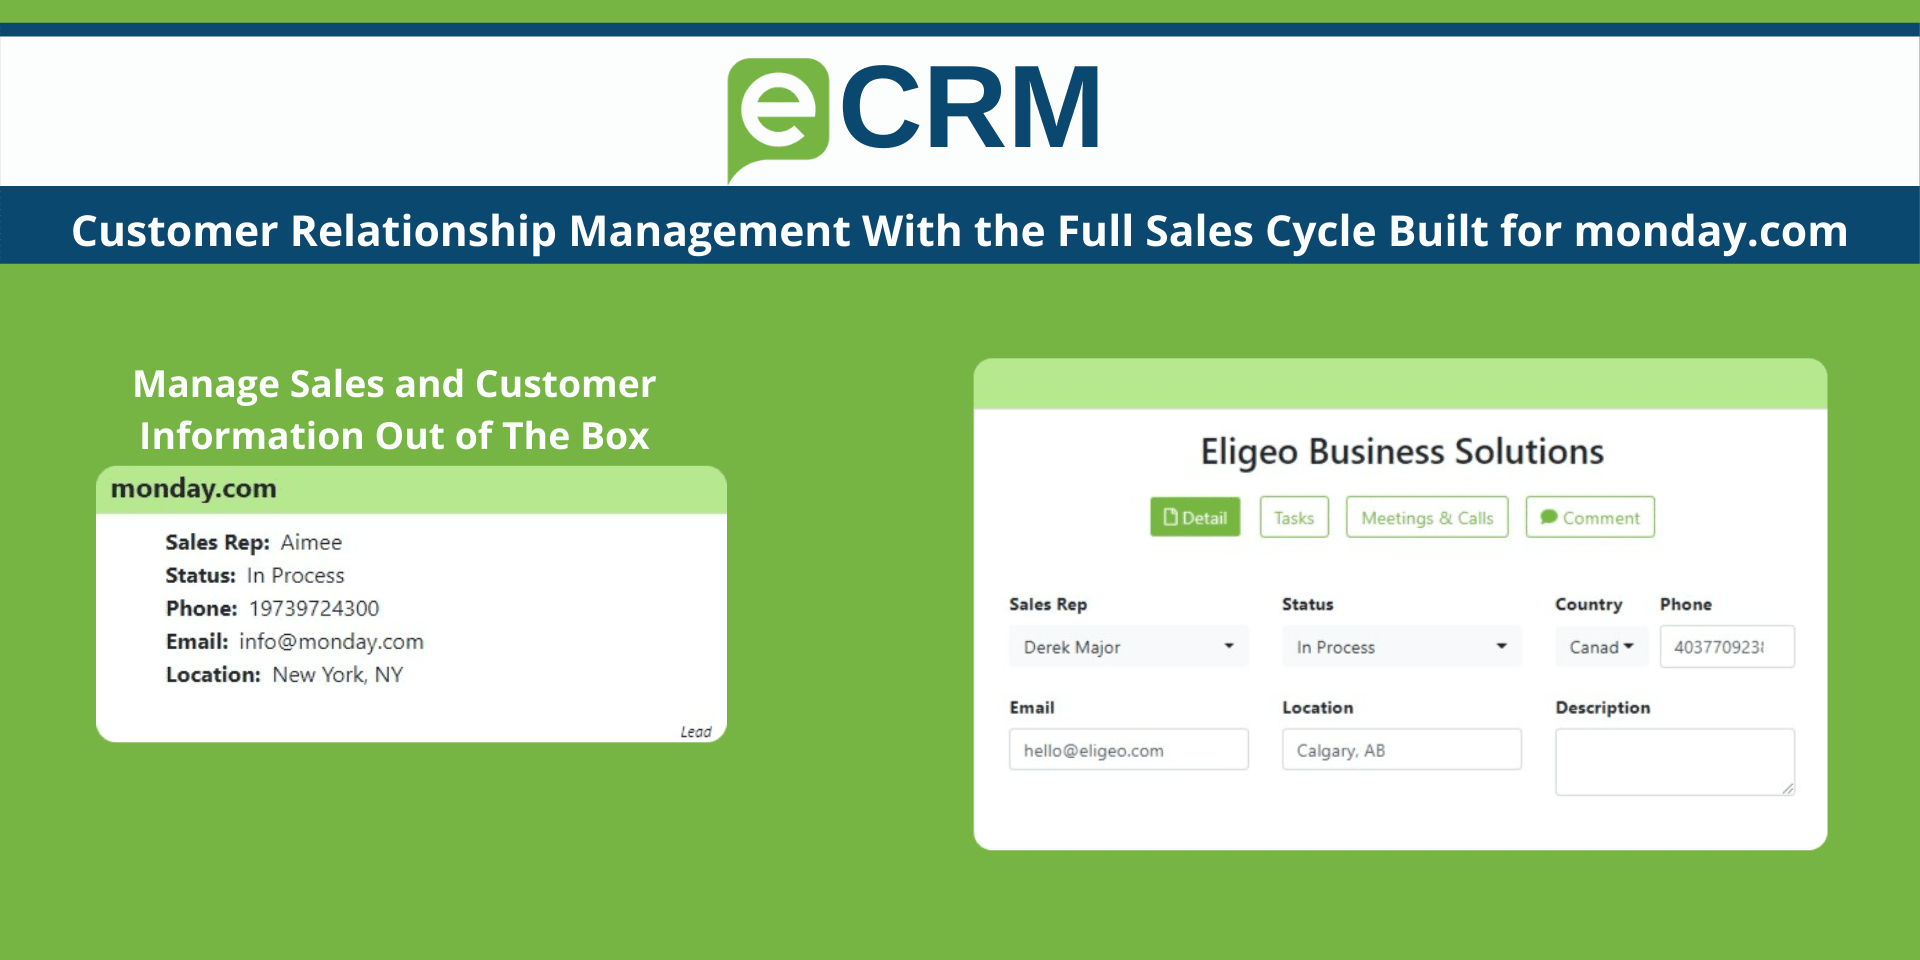 ECRM - How Click & Carry Landed Six Retail Deals at One ECRM Program